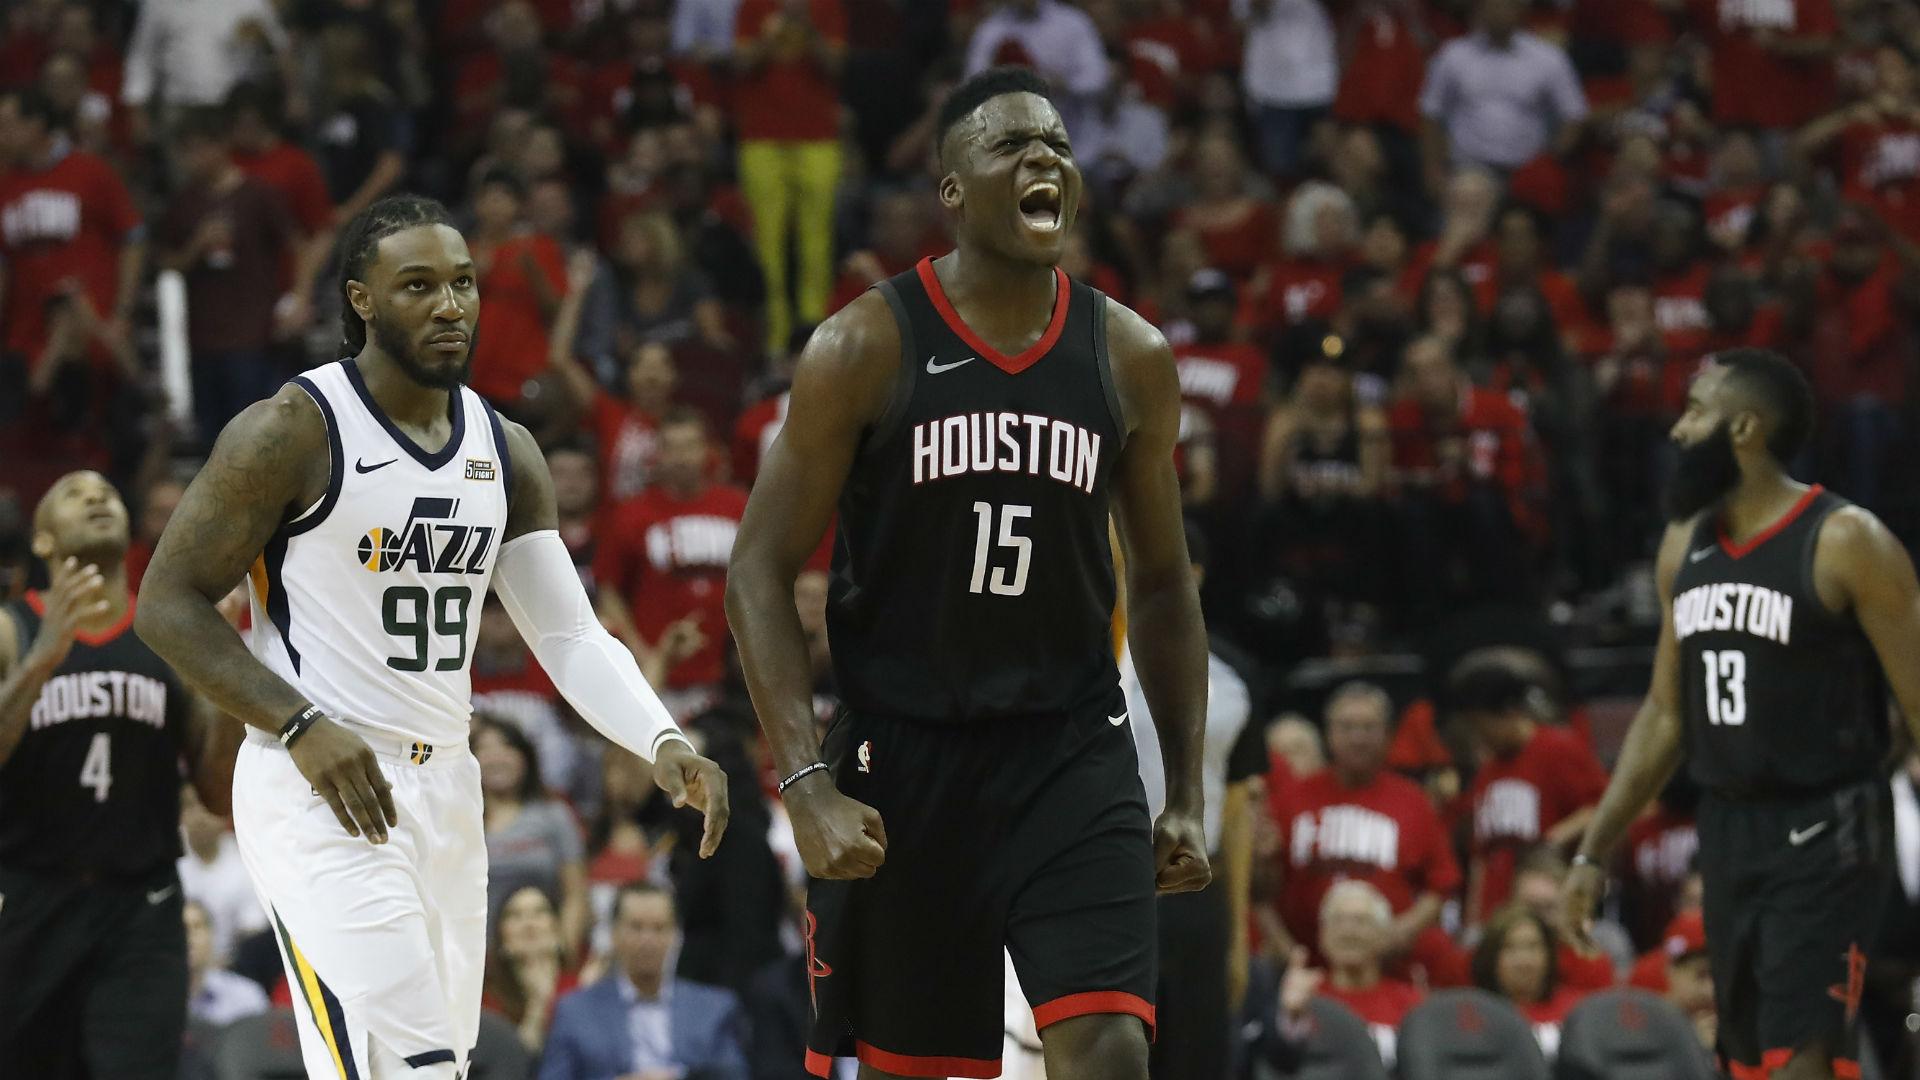 Clint Capela's defense gives Rockets a chance at the impossible